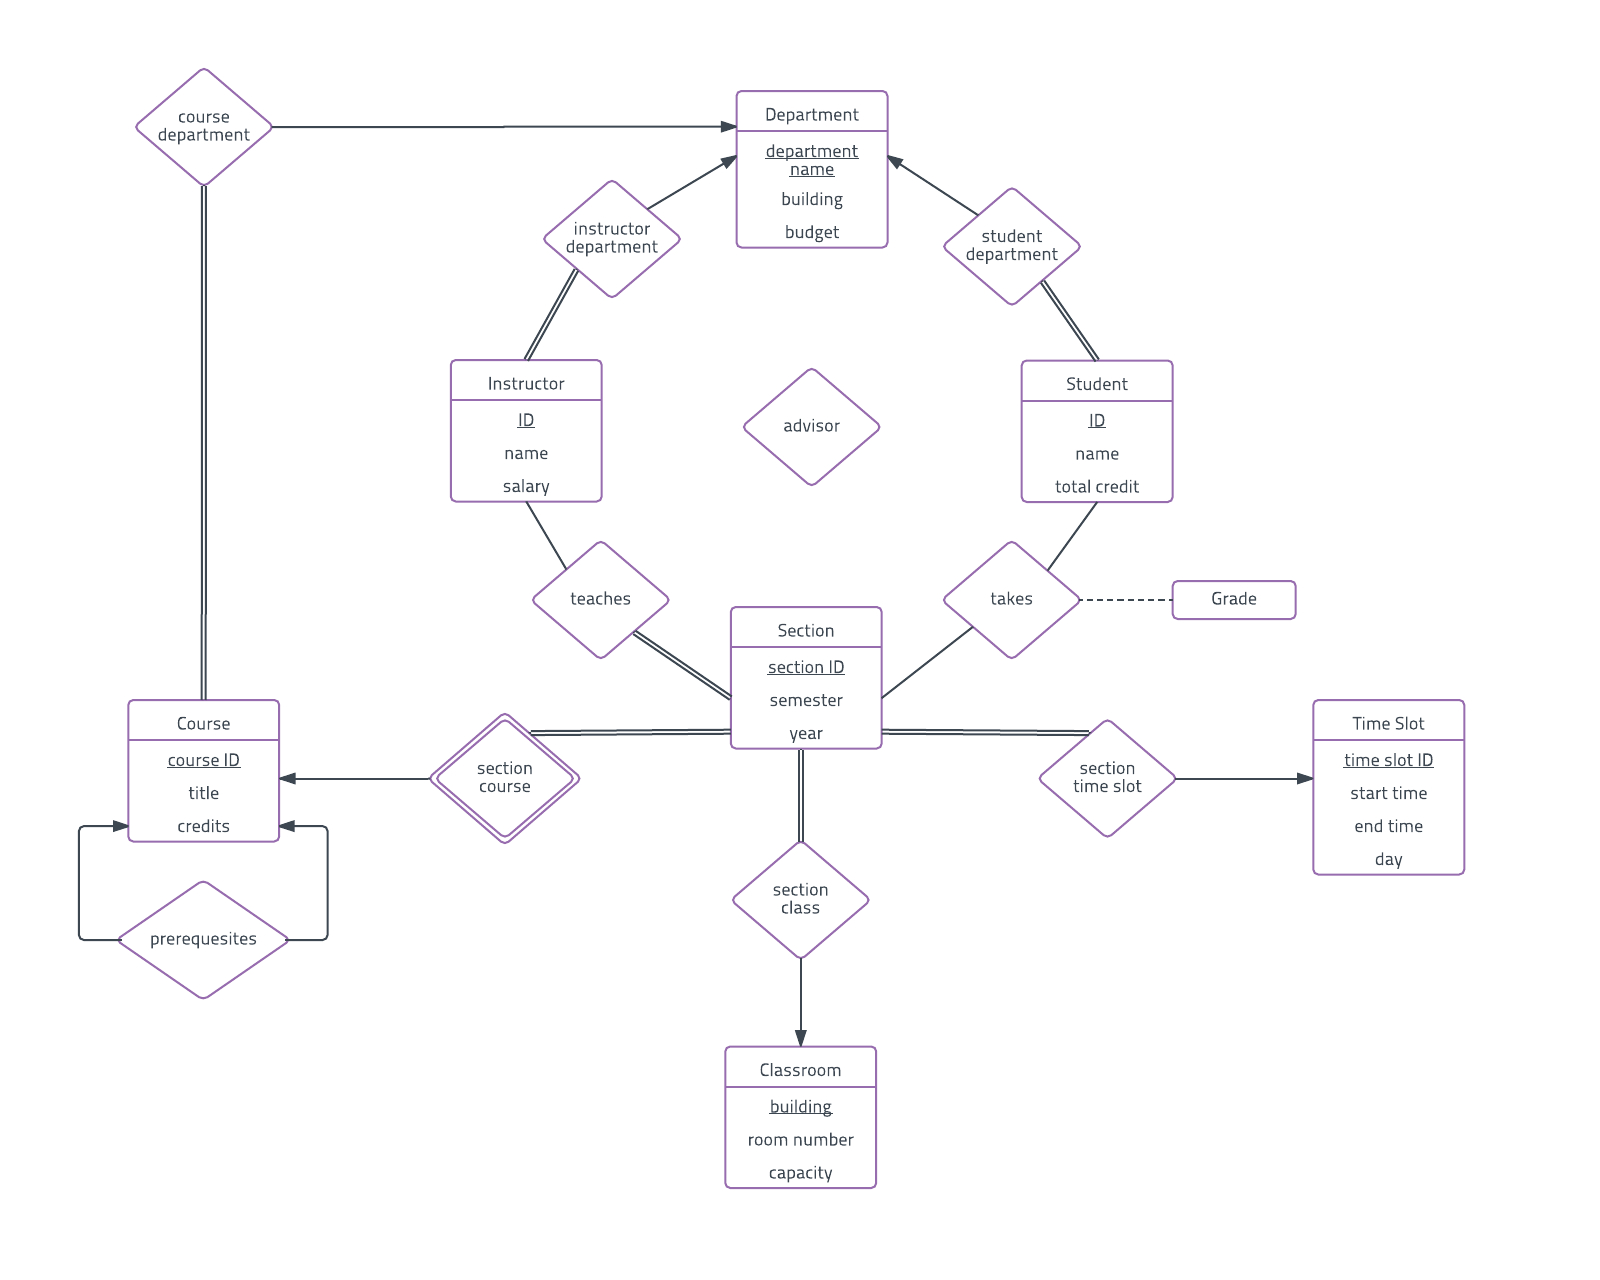 Er Diagram Examples And Templates | Lucidchart intended for Er Diagram With Example